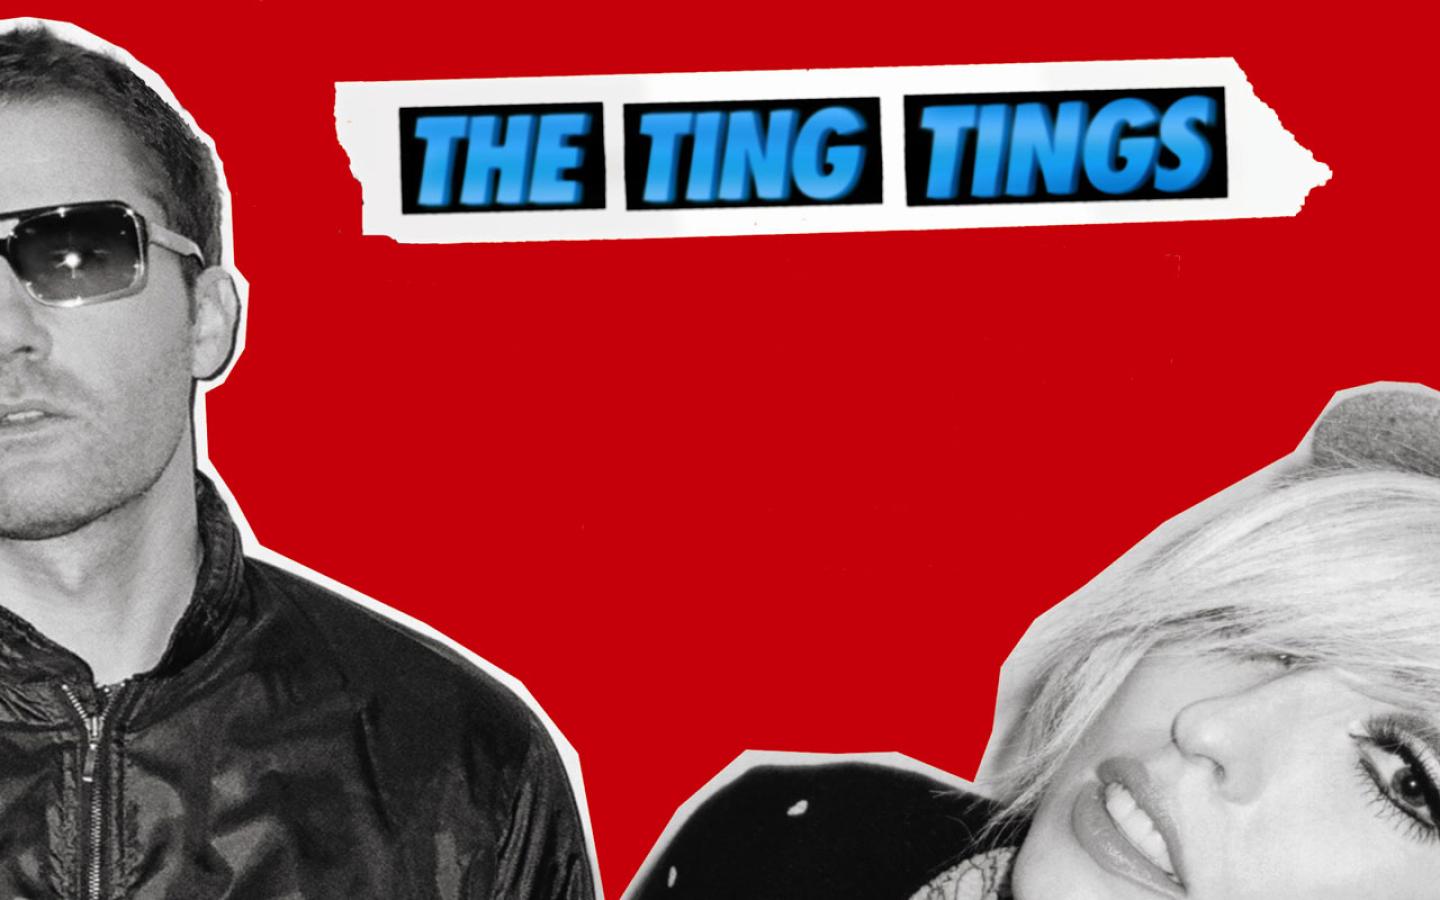 The Ting Tings Wallpaper #4 1440 x 900 